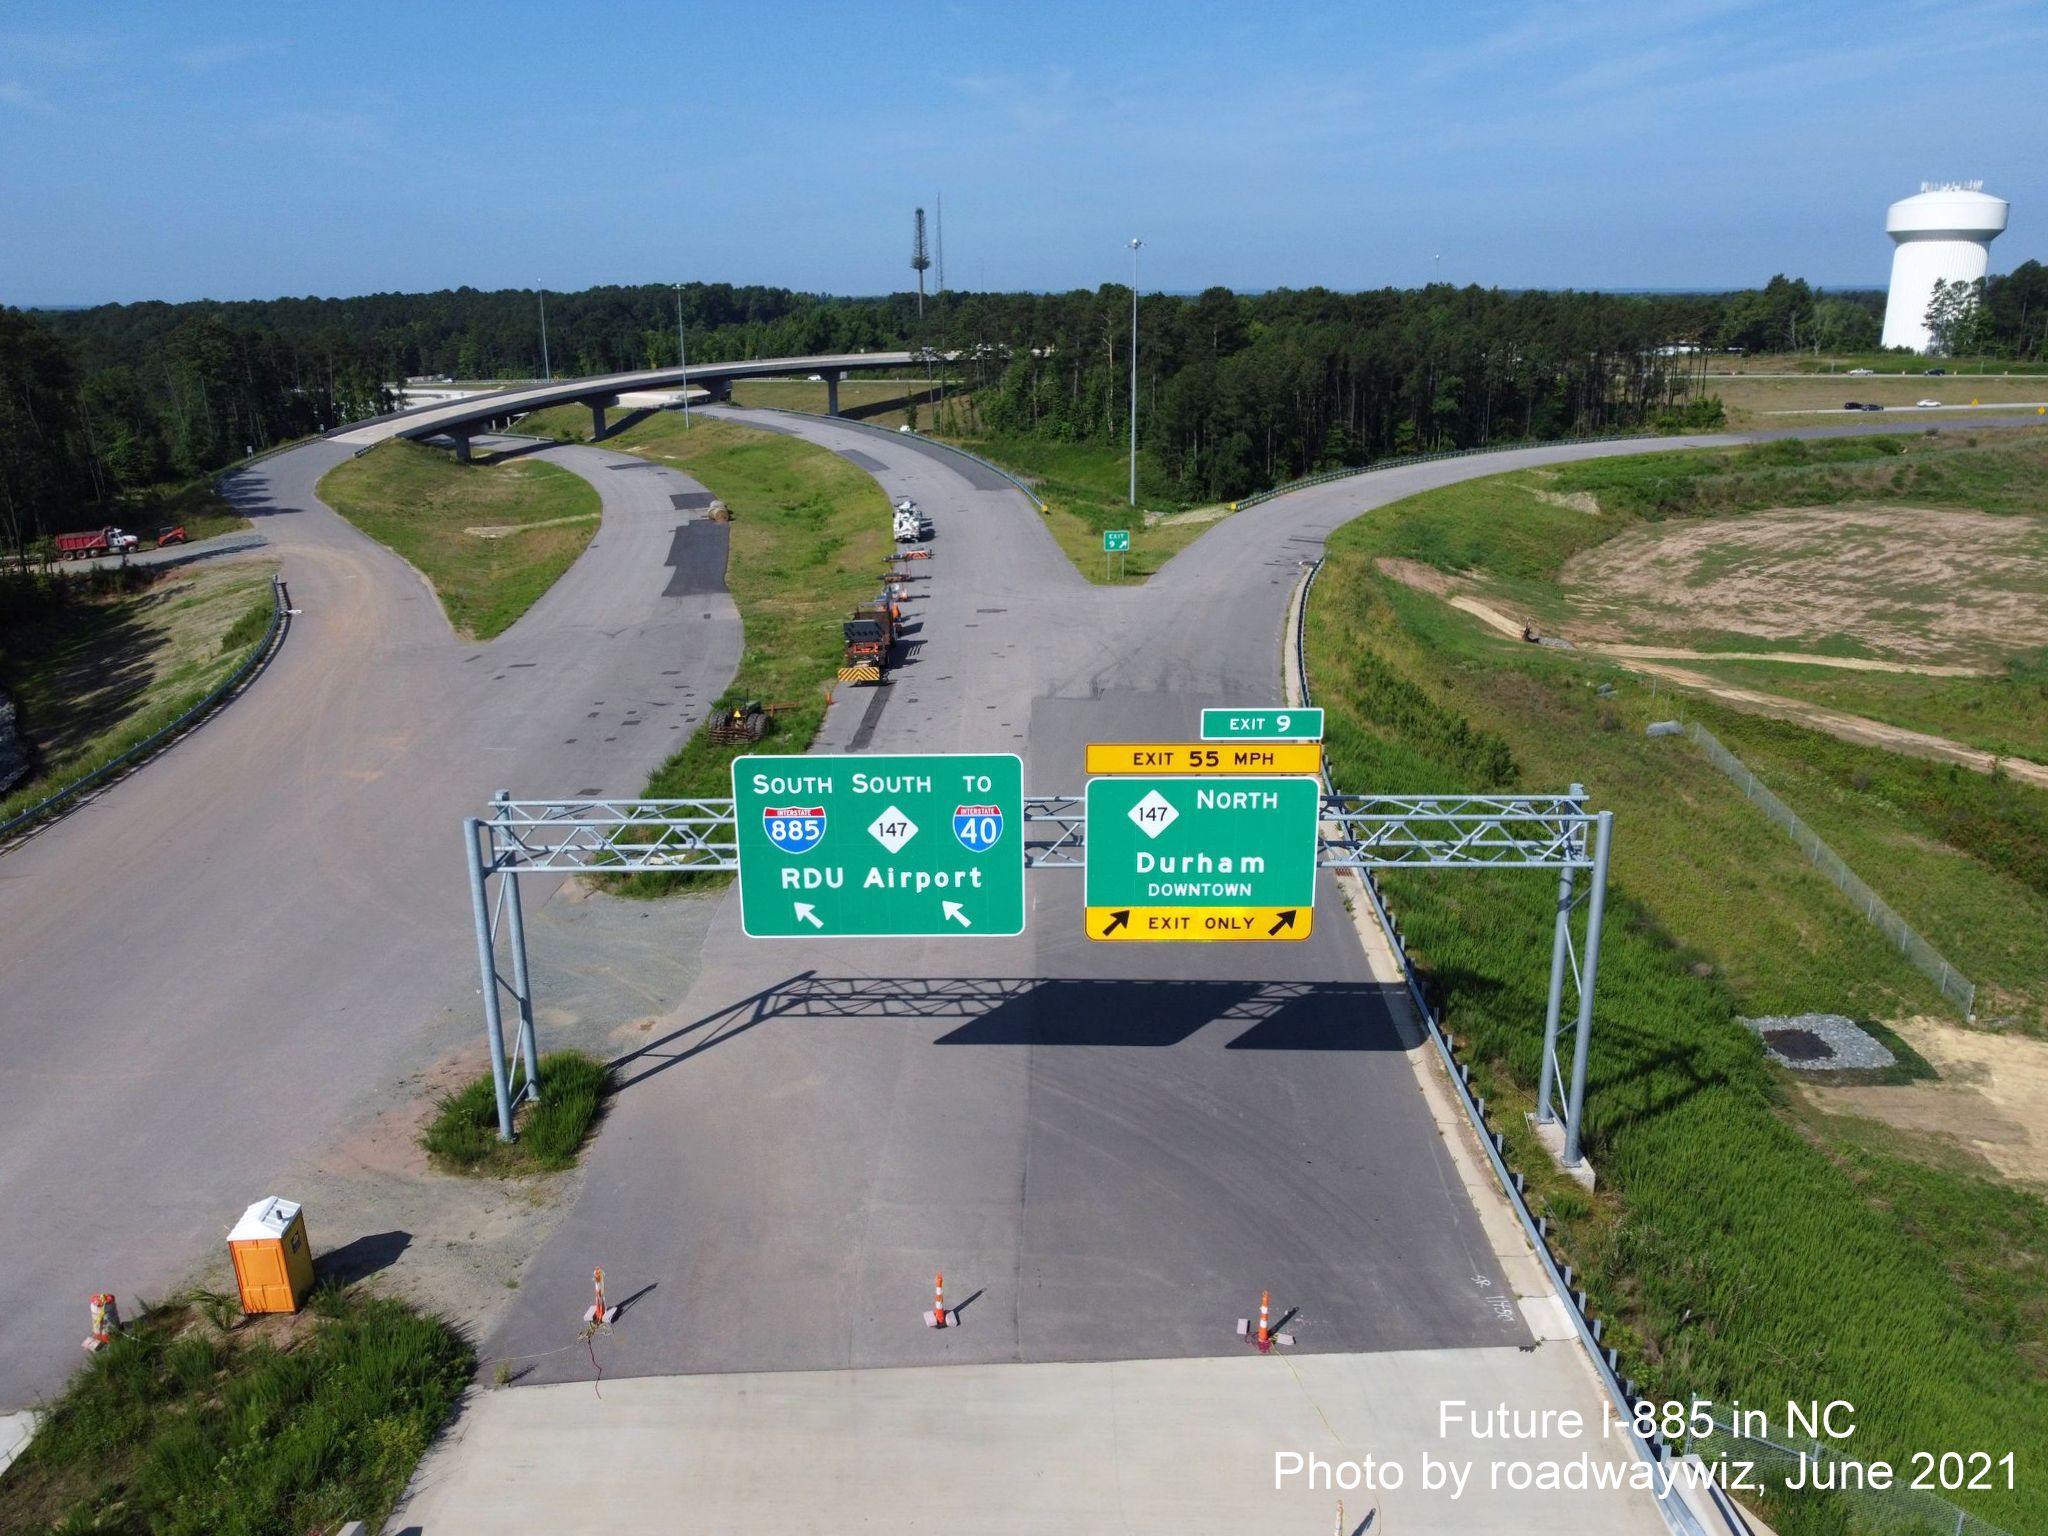 Image of overhead ramp and pull through signs on unopened I-885 South for NC 147/Durham Freeway exit, photo by roadwaywiz, June 2021